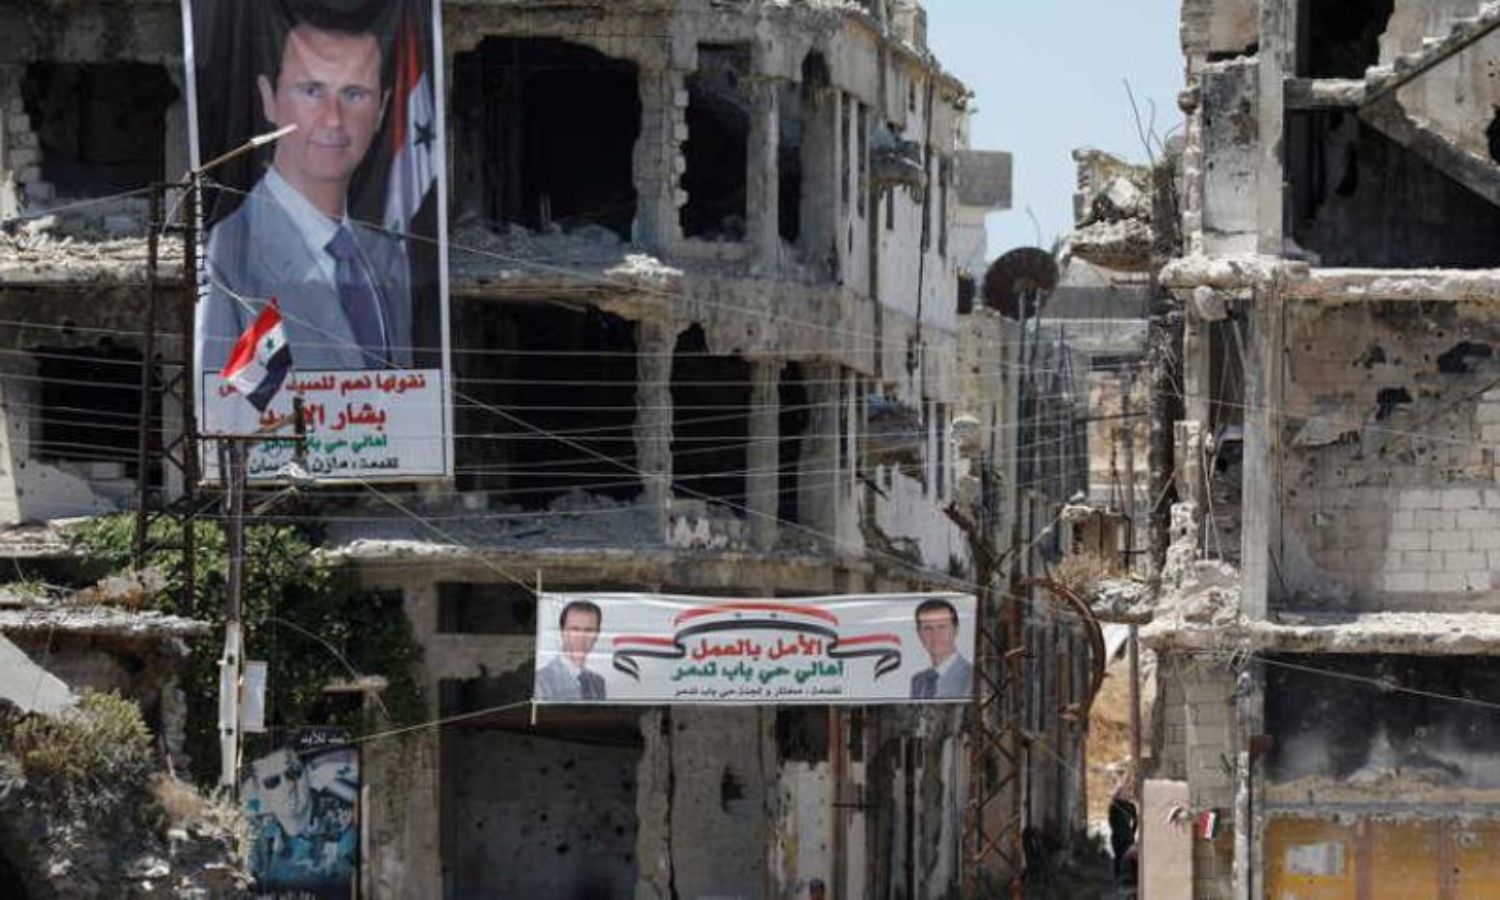 Pictures of the regime’s president, Bashar al-Assad, hanging from battle-ravaged buildings in Homs (Reuters)